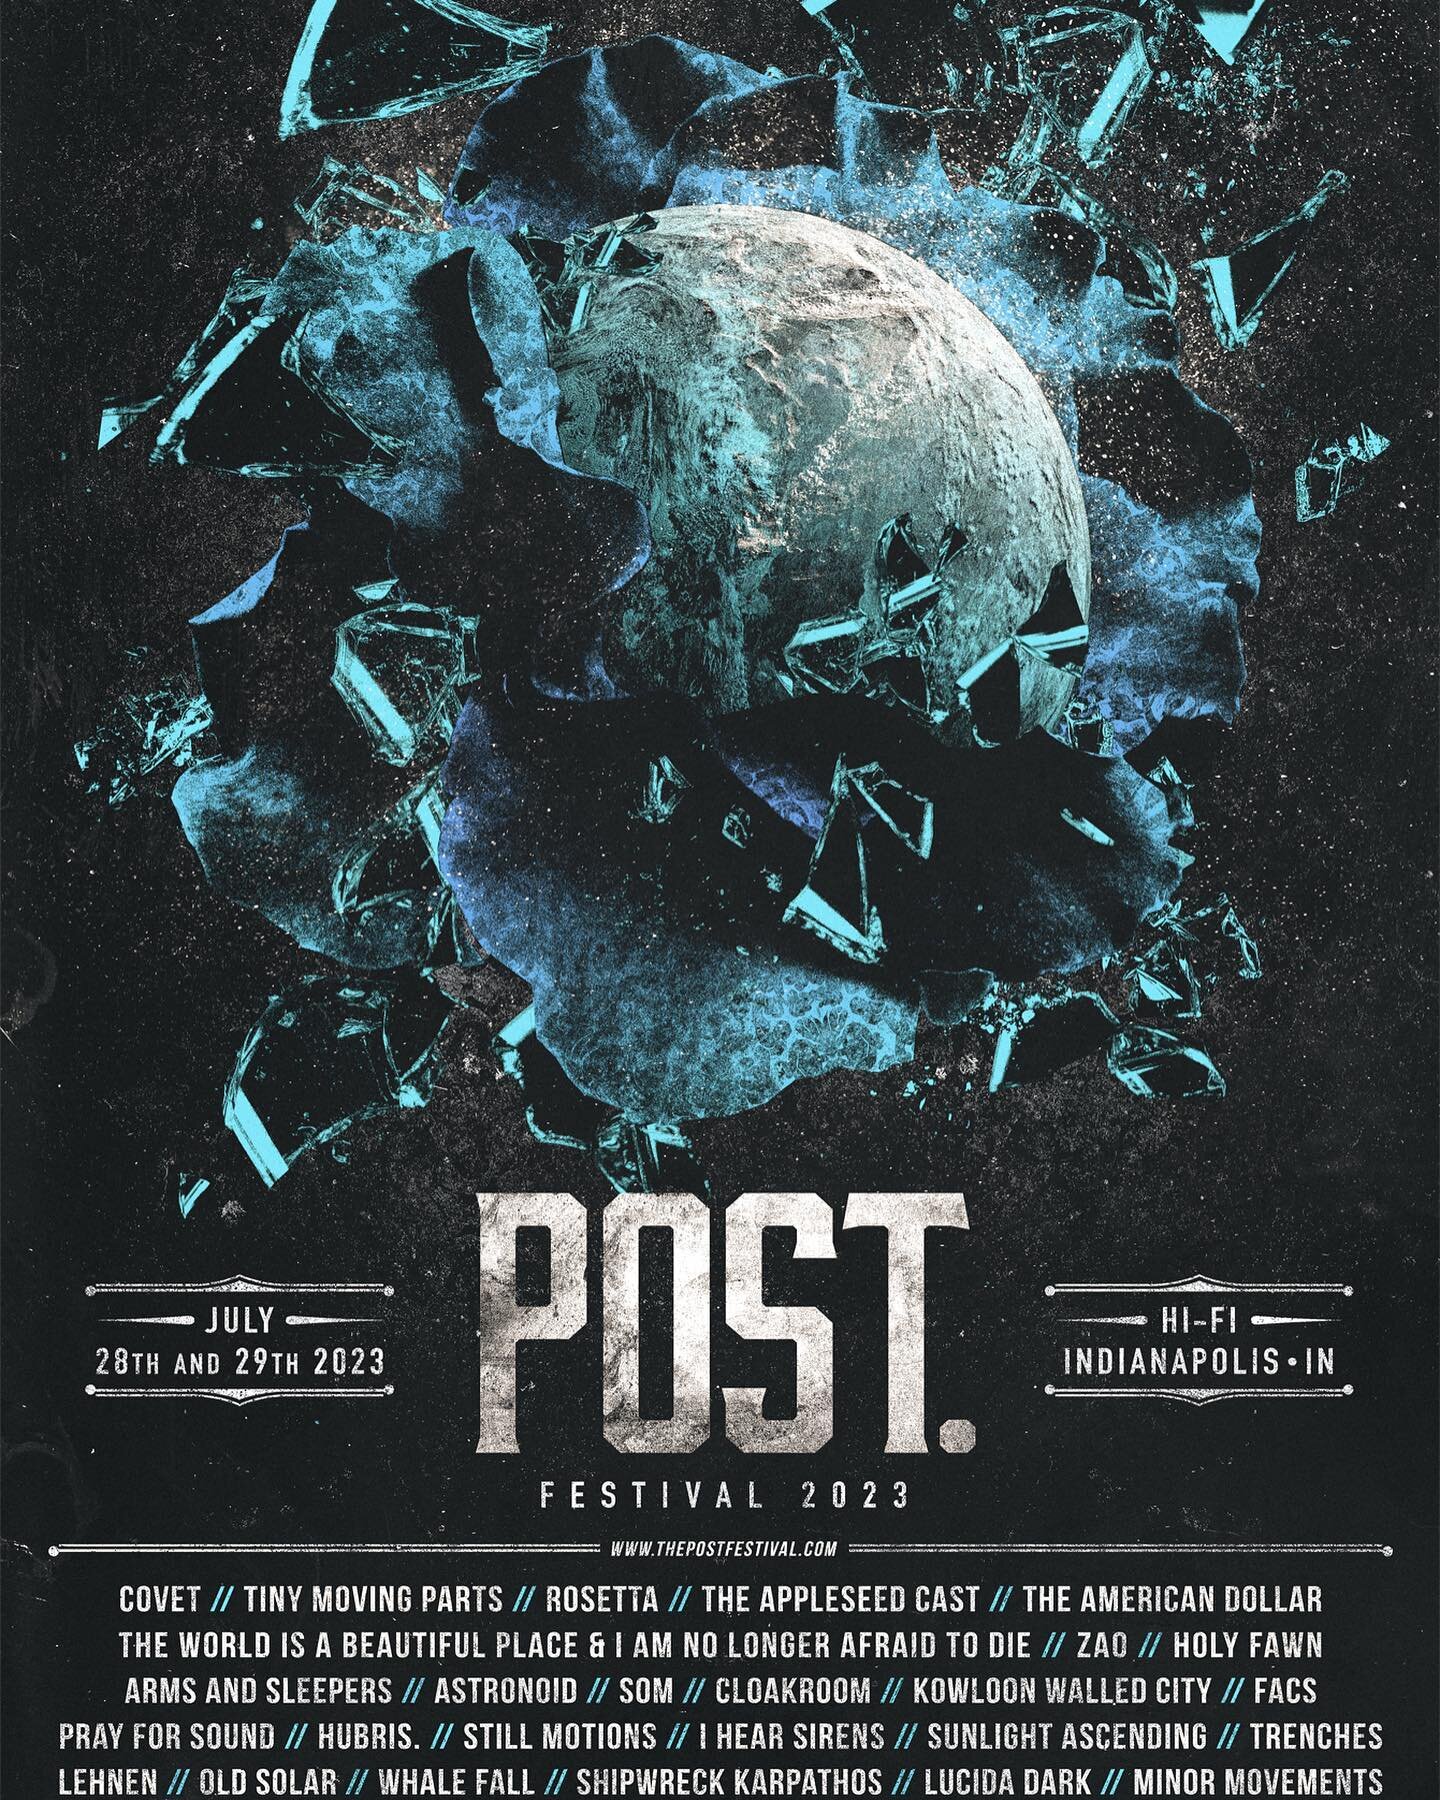 Post. Festival is back and will be hosted at The Hifi on July 28th/29th.  This year's event will have two stages (indoor/outdoor) and all ages will be able to attend.  We&rsquo;ll be there to capture it all!